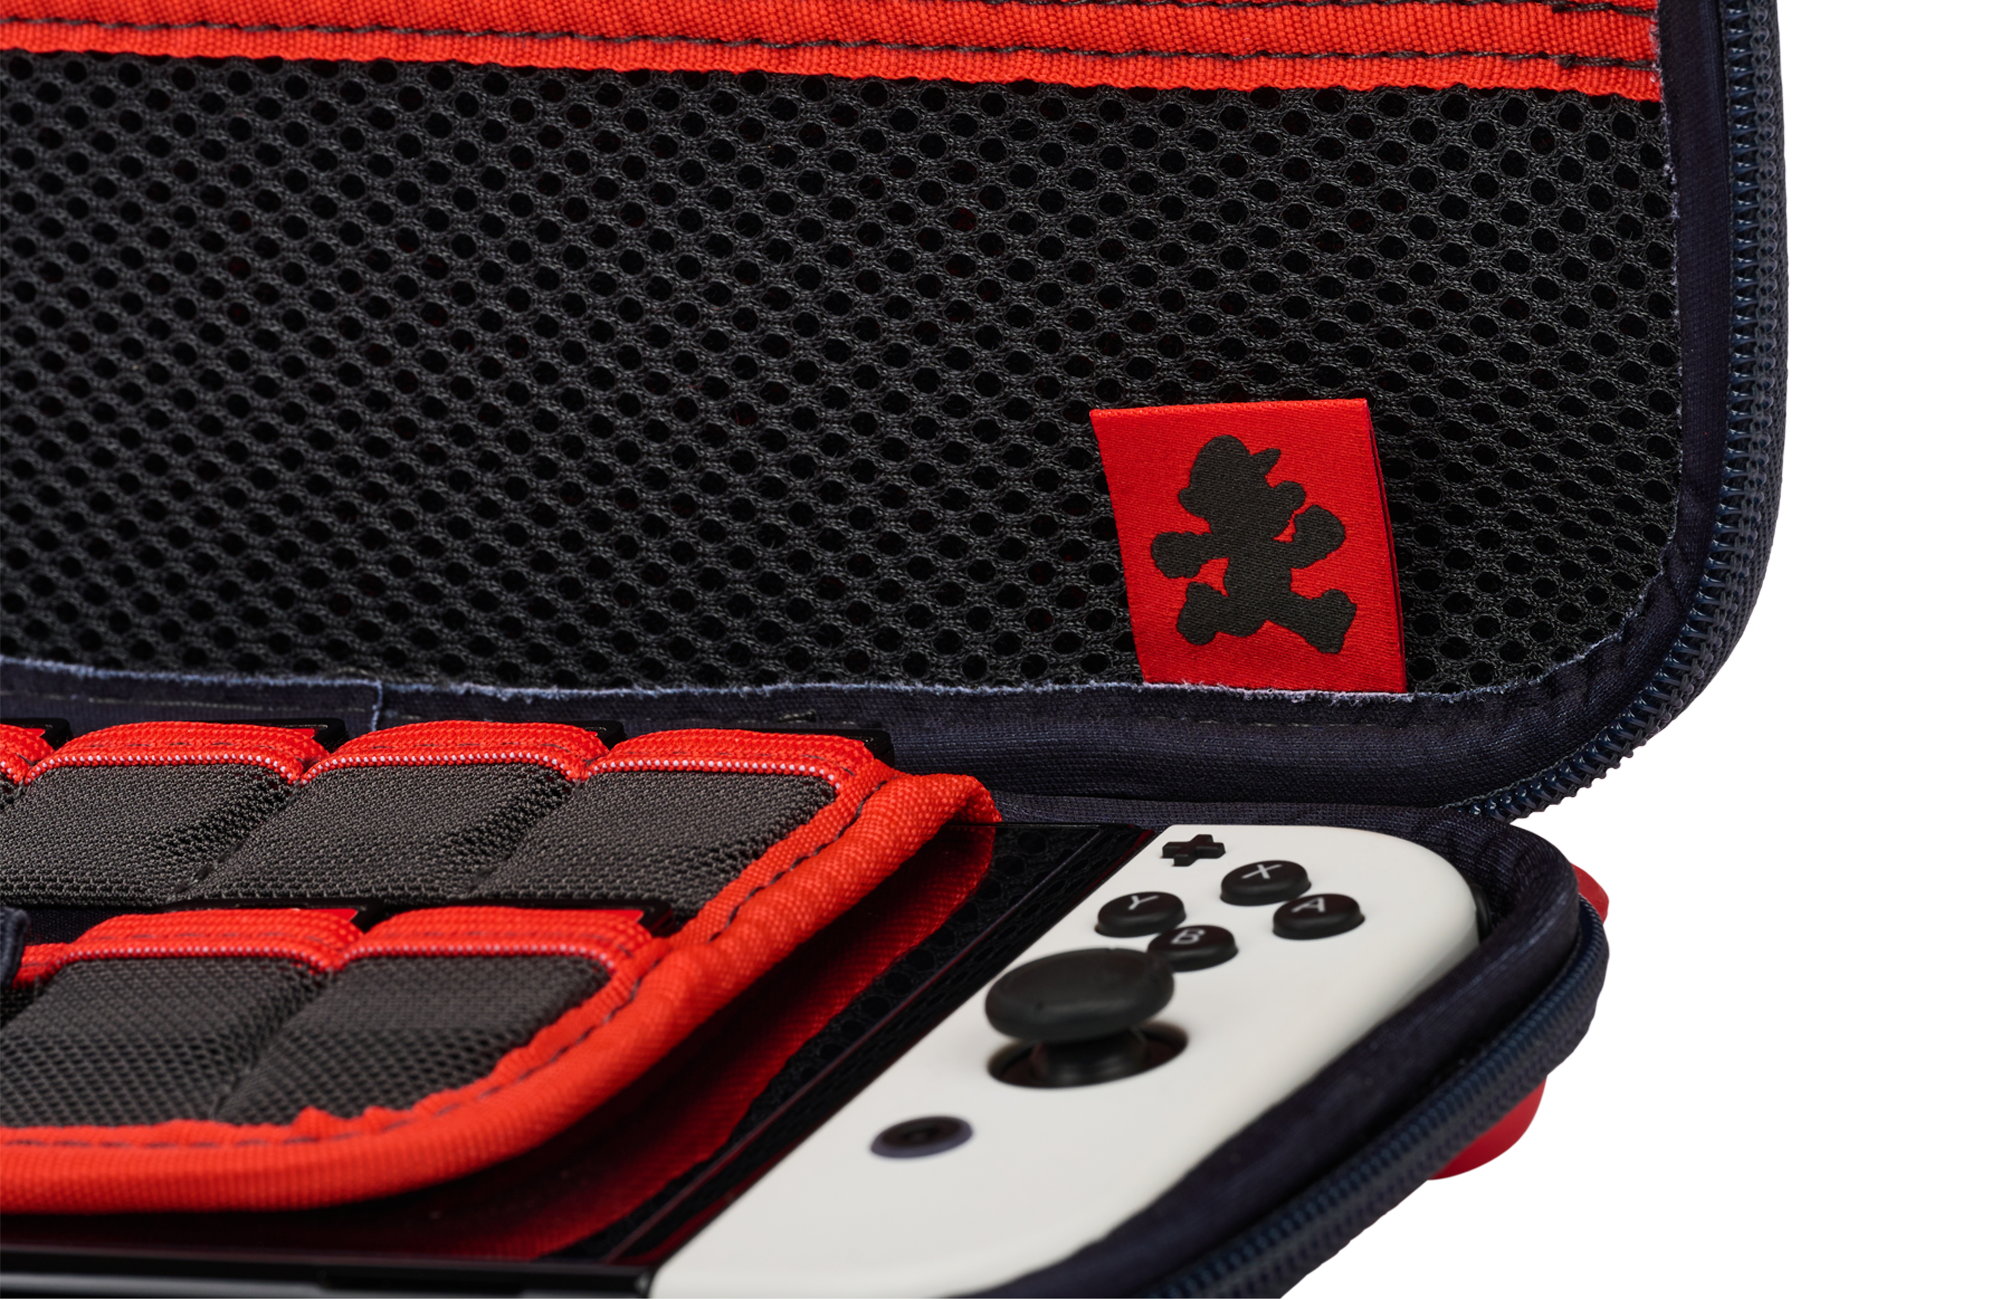 PowerA Protection Case for Nintendo Switch, OLED, Switch Lite - Speedster Mario